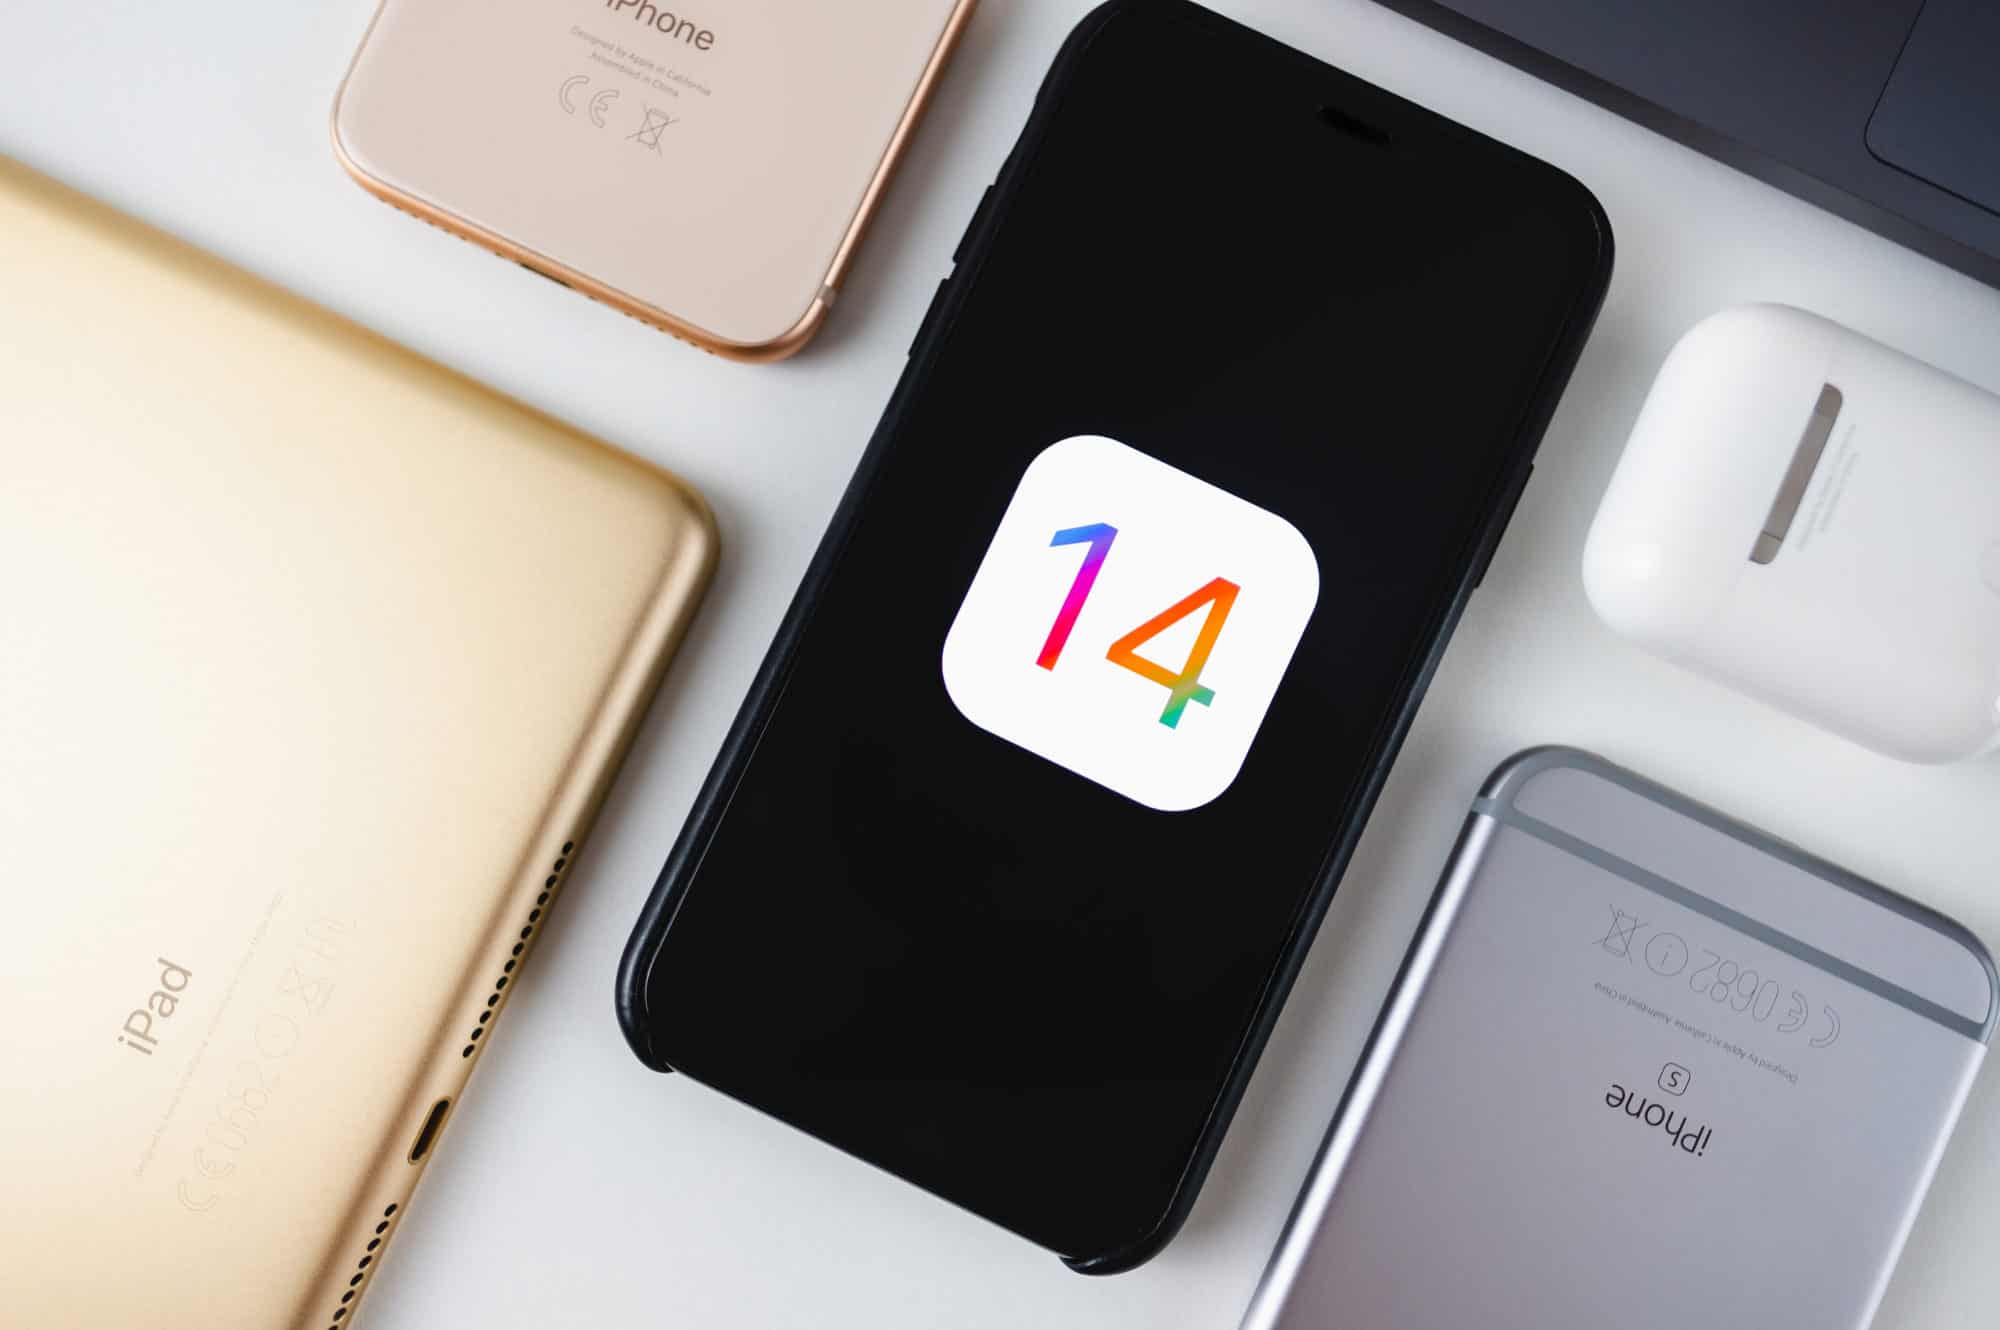 iOS 14 is a Big Efficiency Upgrade! Here Are the Best New Features